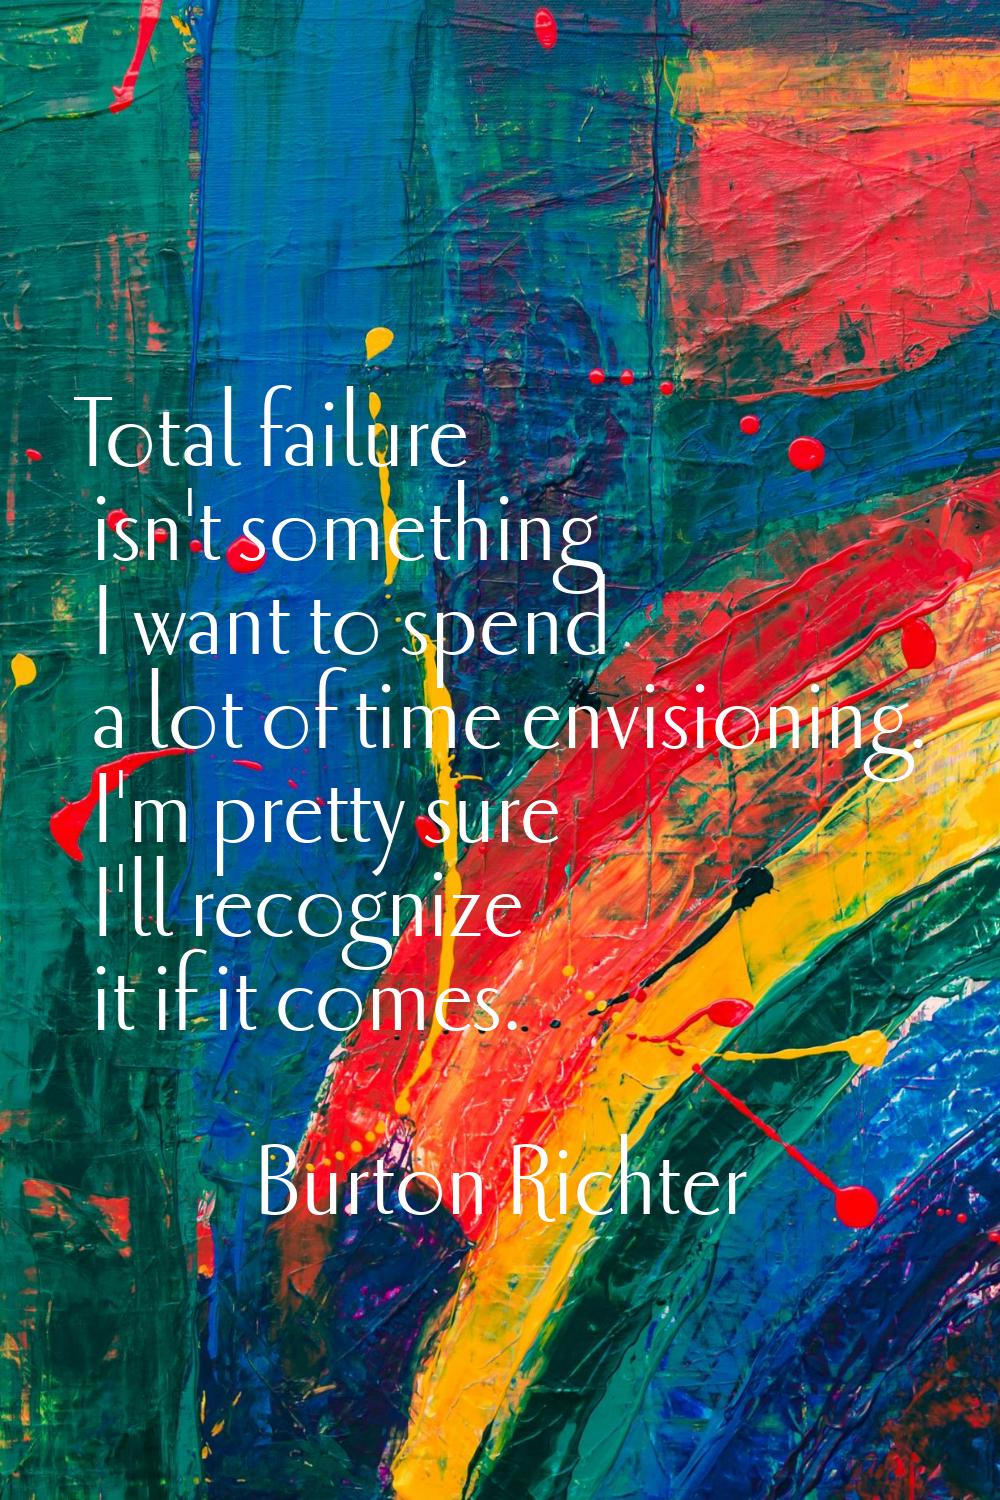 Total failure isn't something I want to spend a lot of time envisioning. I'm pretty sure I'll recog